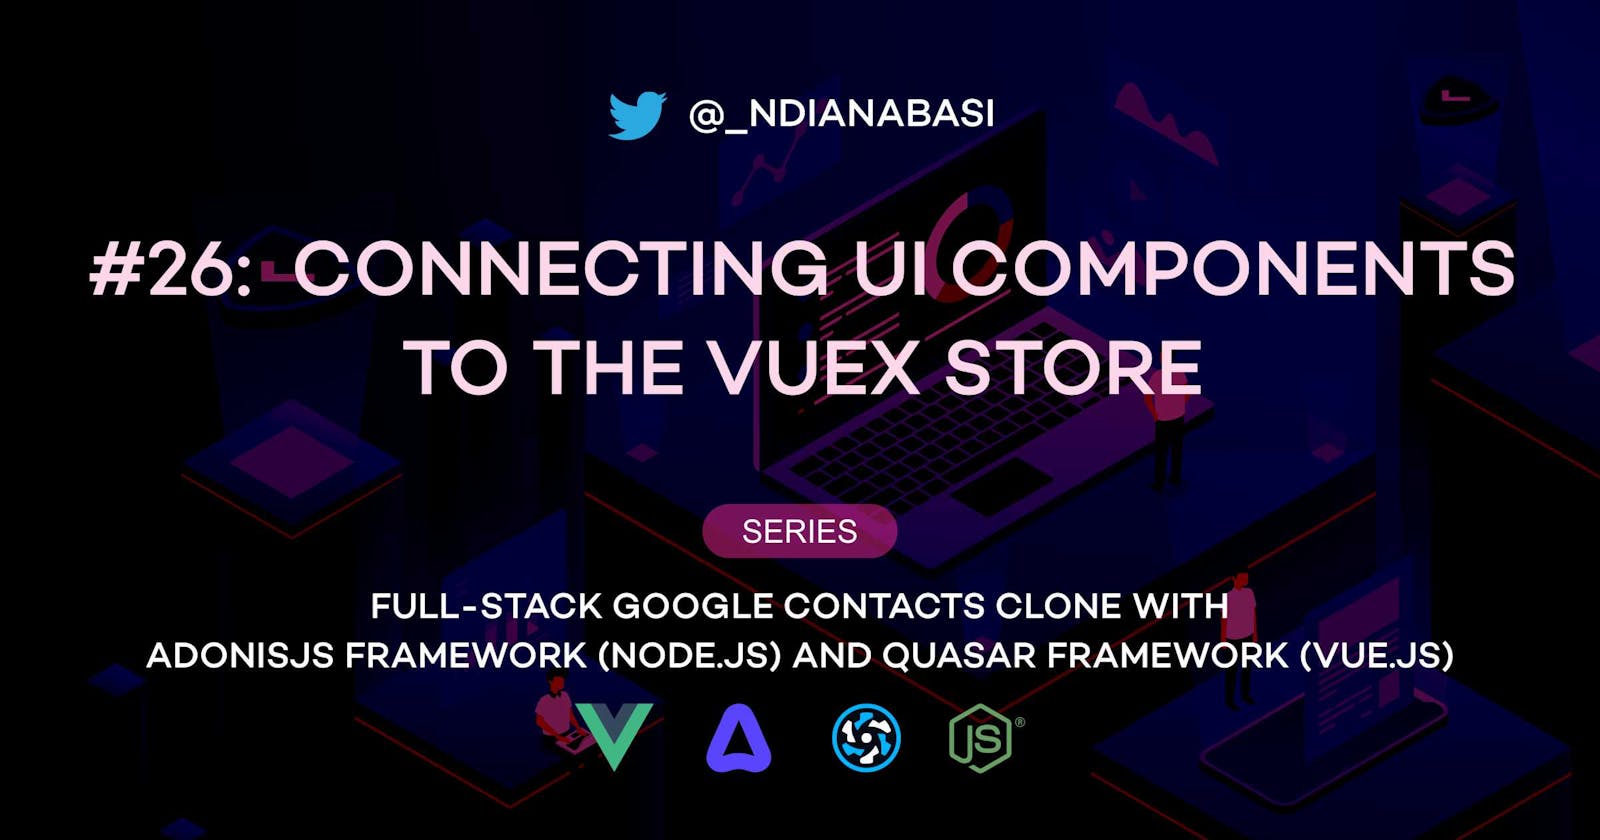 Connecting UI Components to the Vuex Store | Full-Stack Google Contacts Clone with AdonisJS Framework (Node.js) and Quasar Framework (Vue.js)